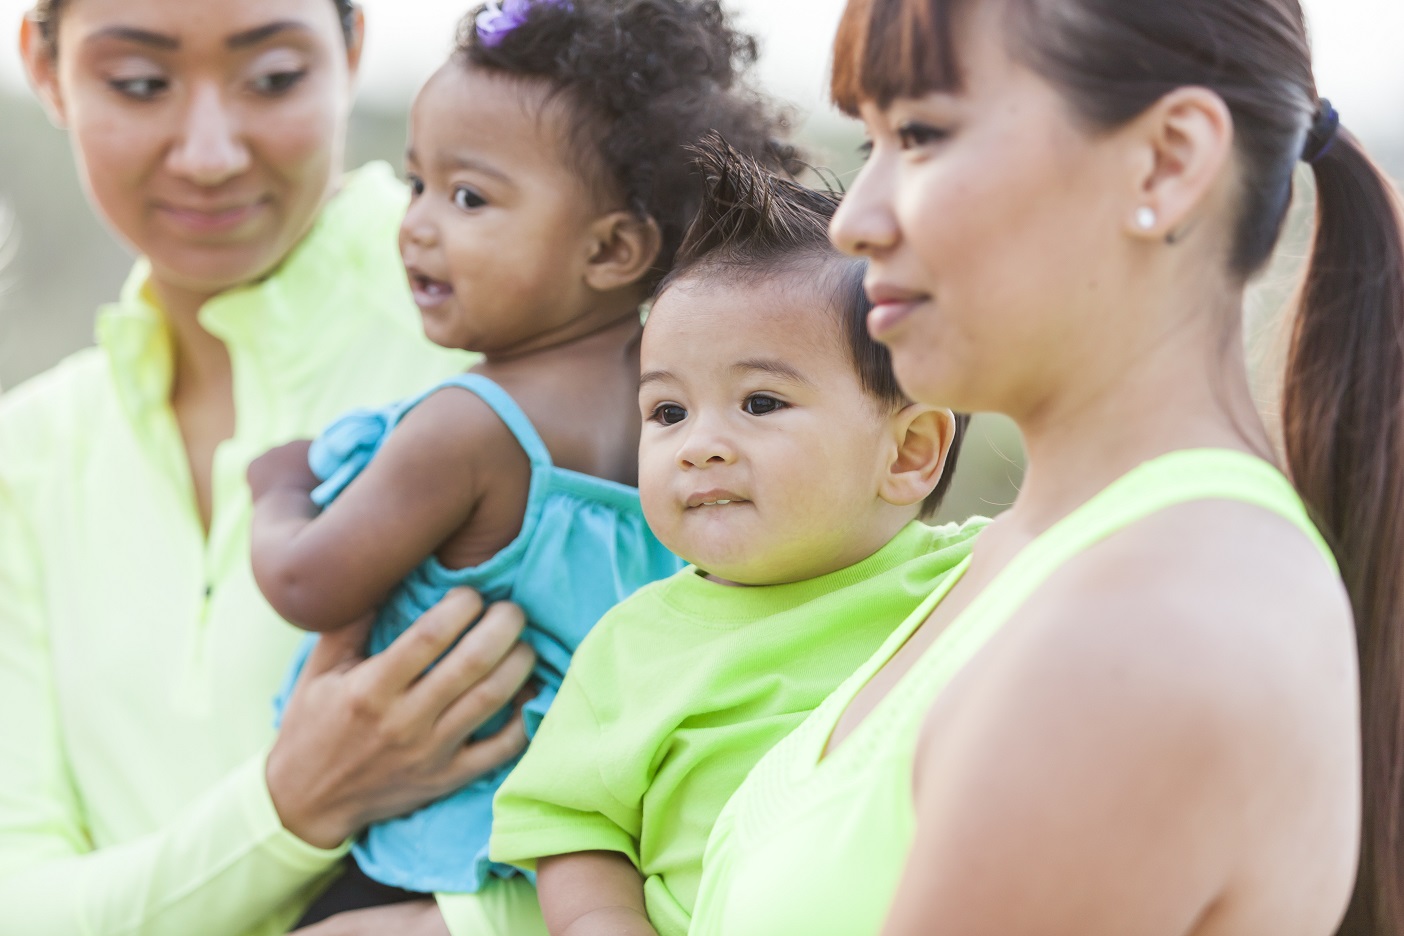 Close up of two multi-ethnic mothers carrying their babies. The focus is on the mixed race (Asian and Caucasian) baby boy in the light green shirt. He is relaxed in his mother's arms.